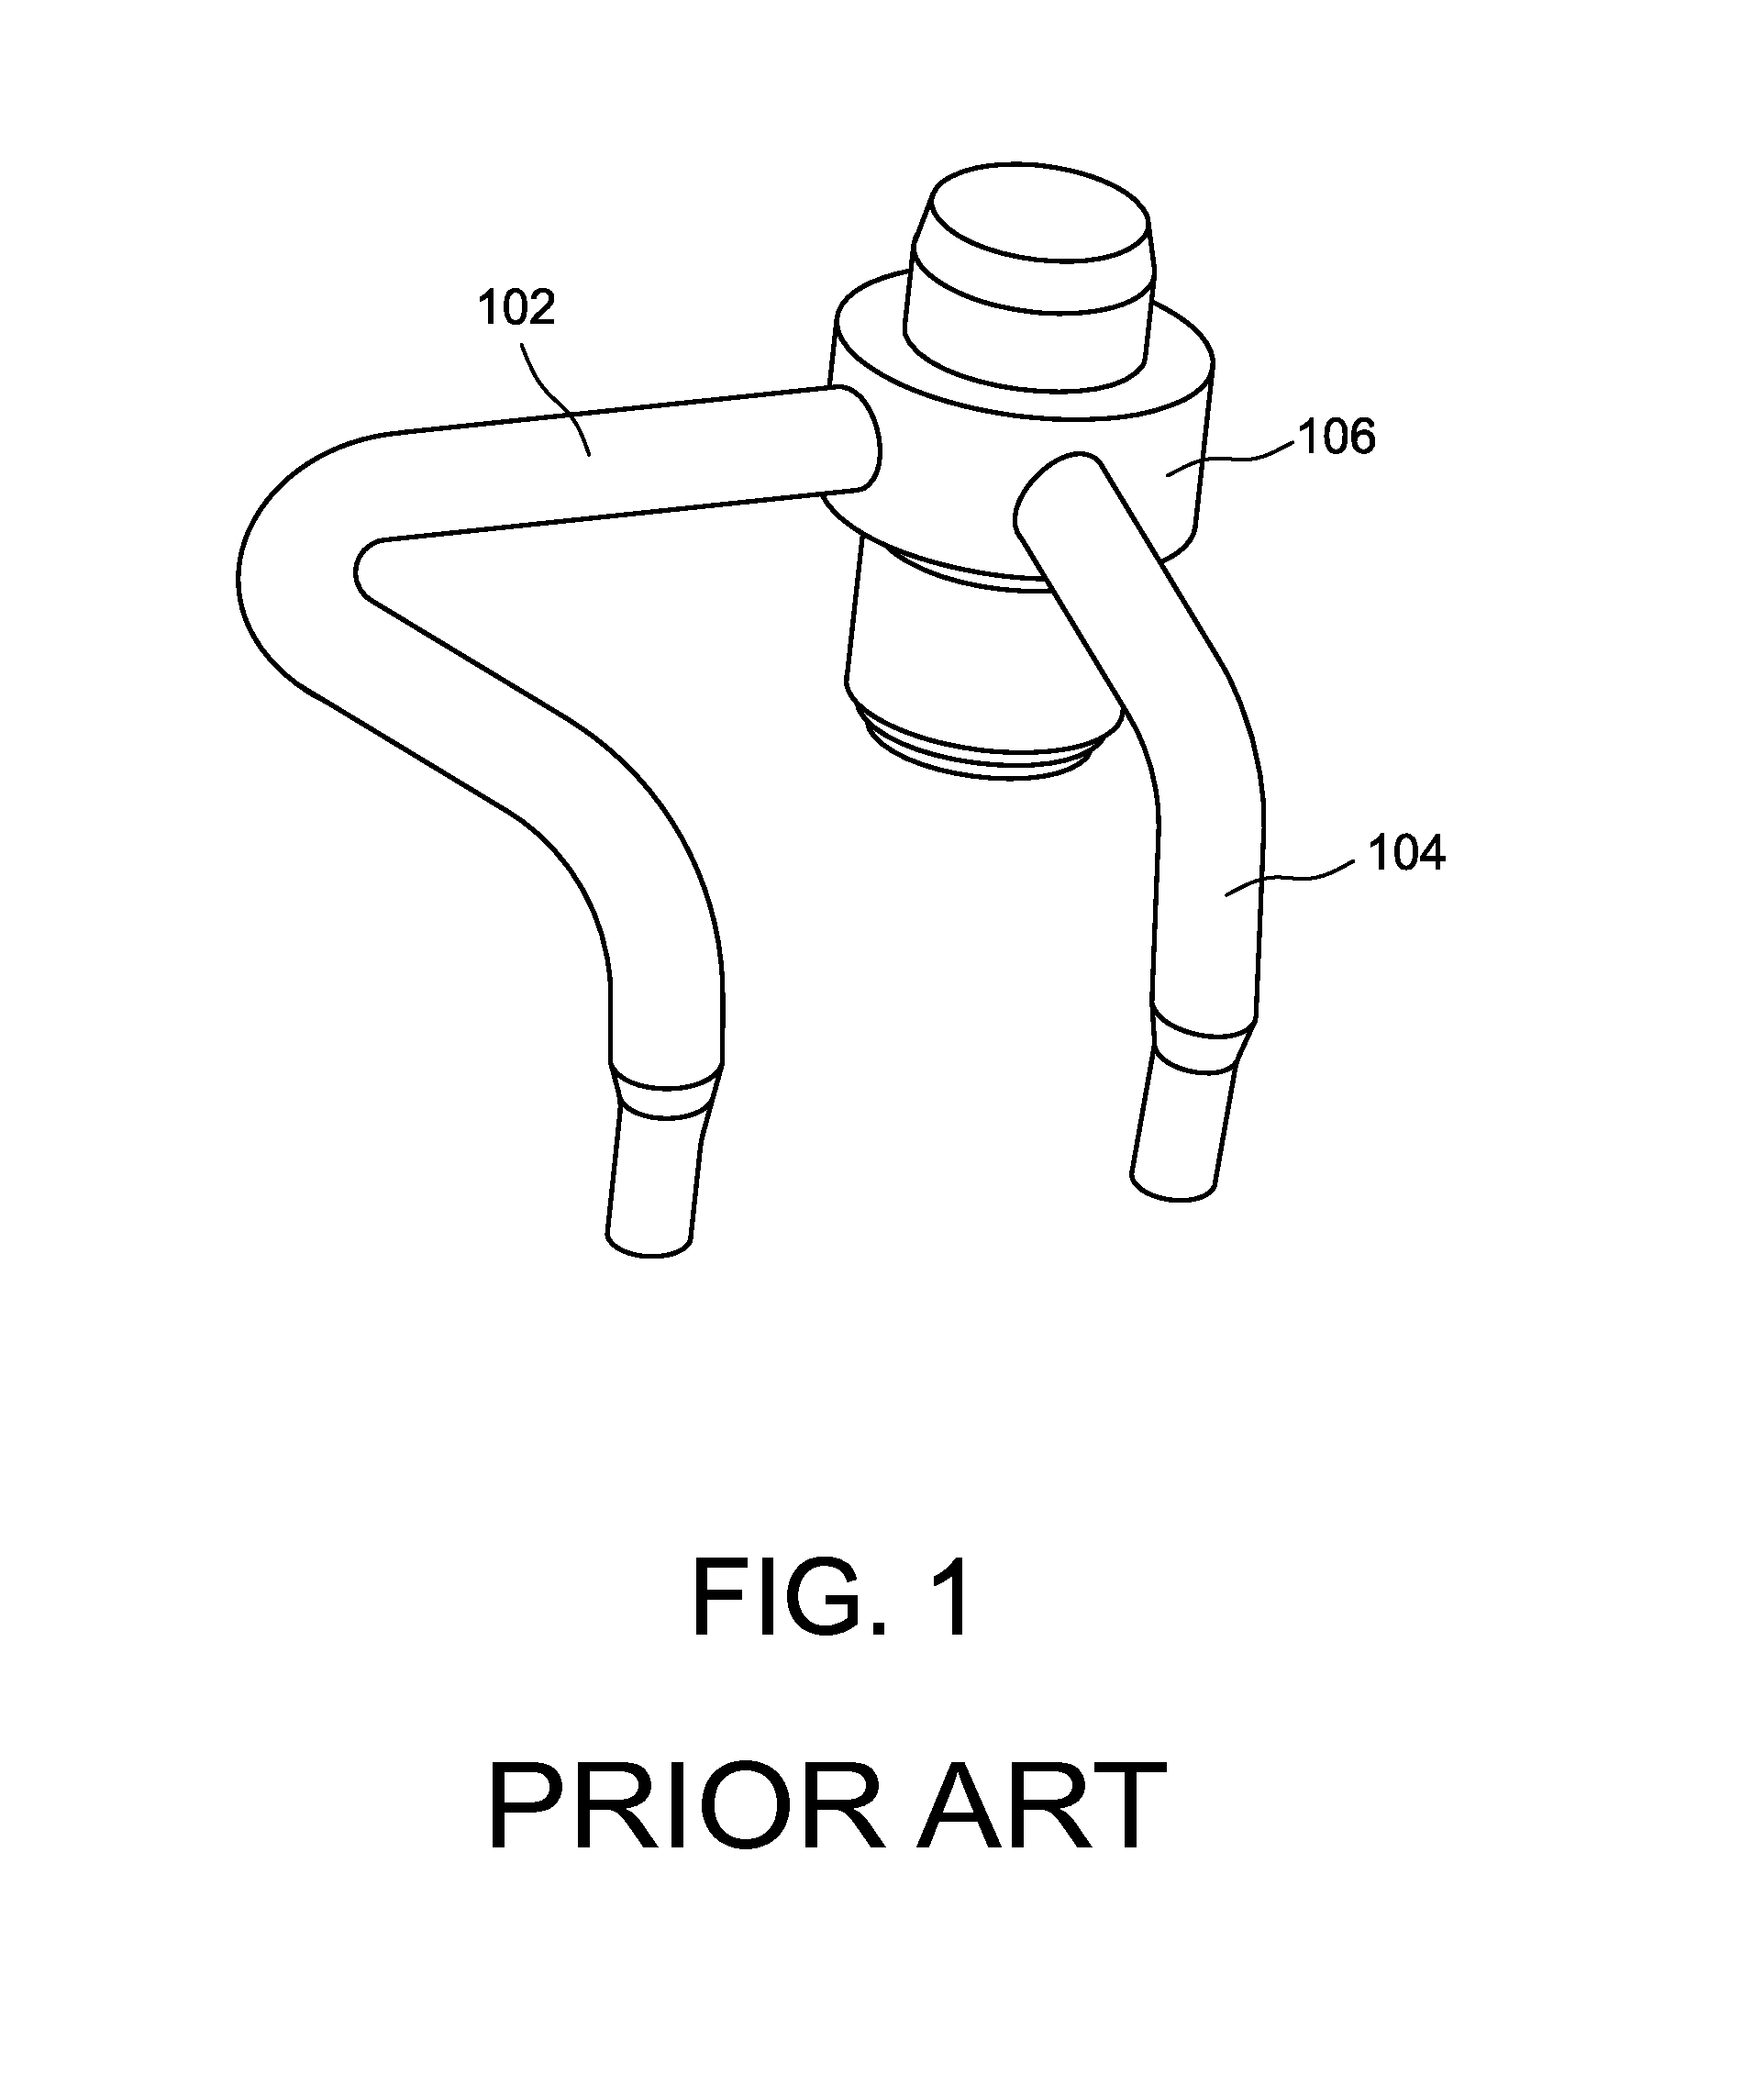 Compact Cooling Device for an Internal Combustion Engine and Method for Manufacturing Such a Device